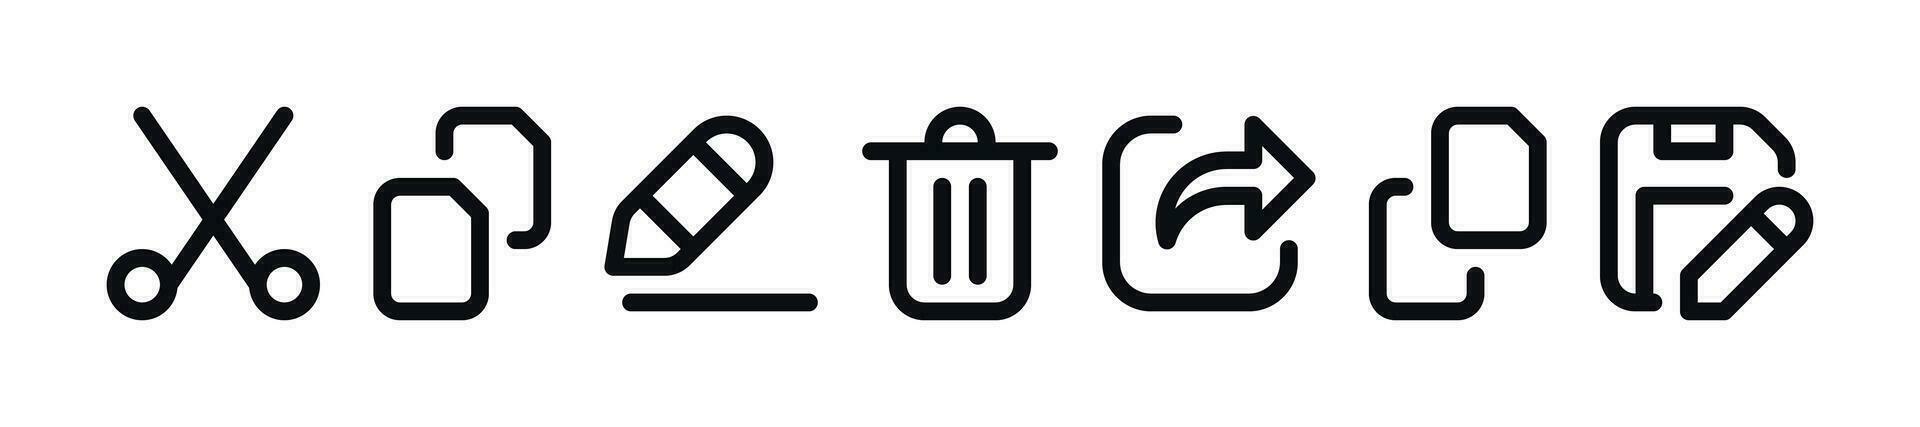 File Manager Actions Icon Set - Trash Can, Save As, Copy, Paste, Rename, Cut Symbols vector